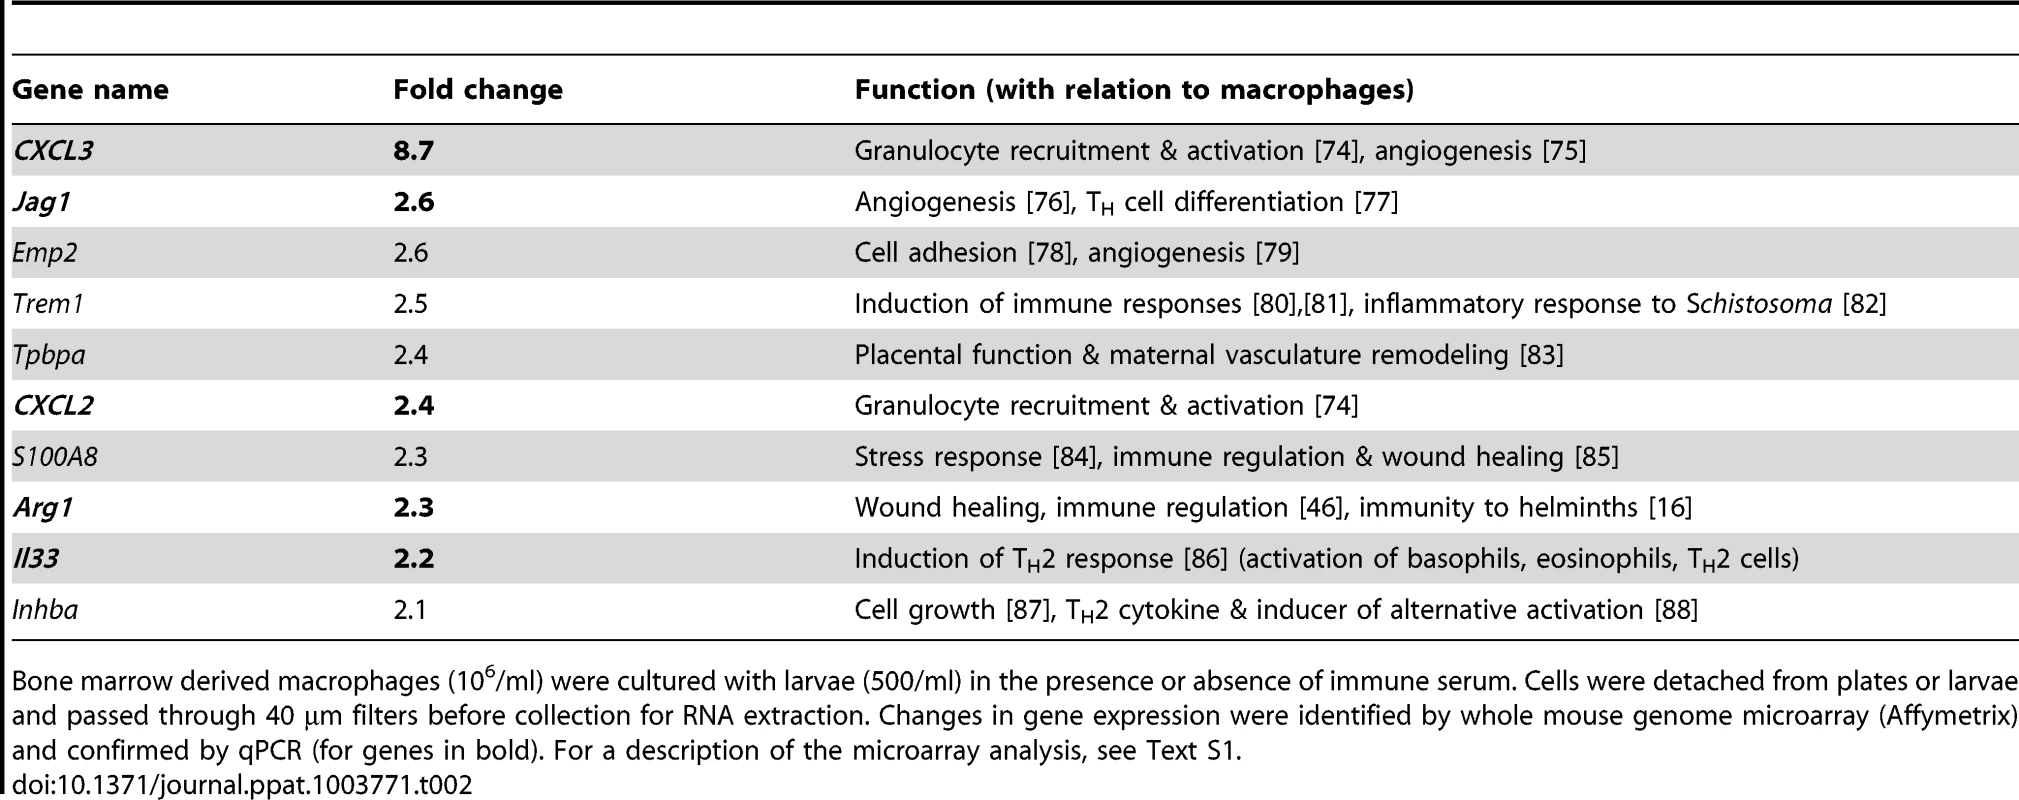 Fold induction and function of the 10 most upregulated genes in macrophages co-cultured with immune serum in combination with larvae as compared to larvae alone.